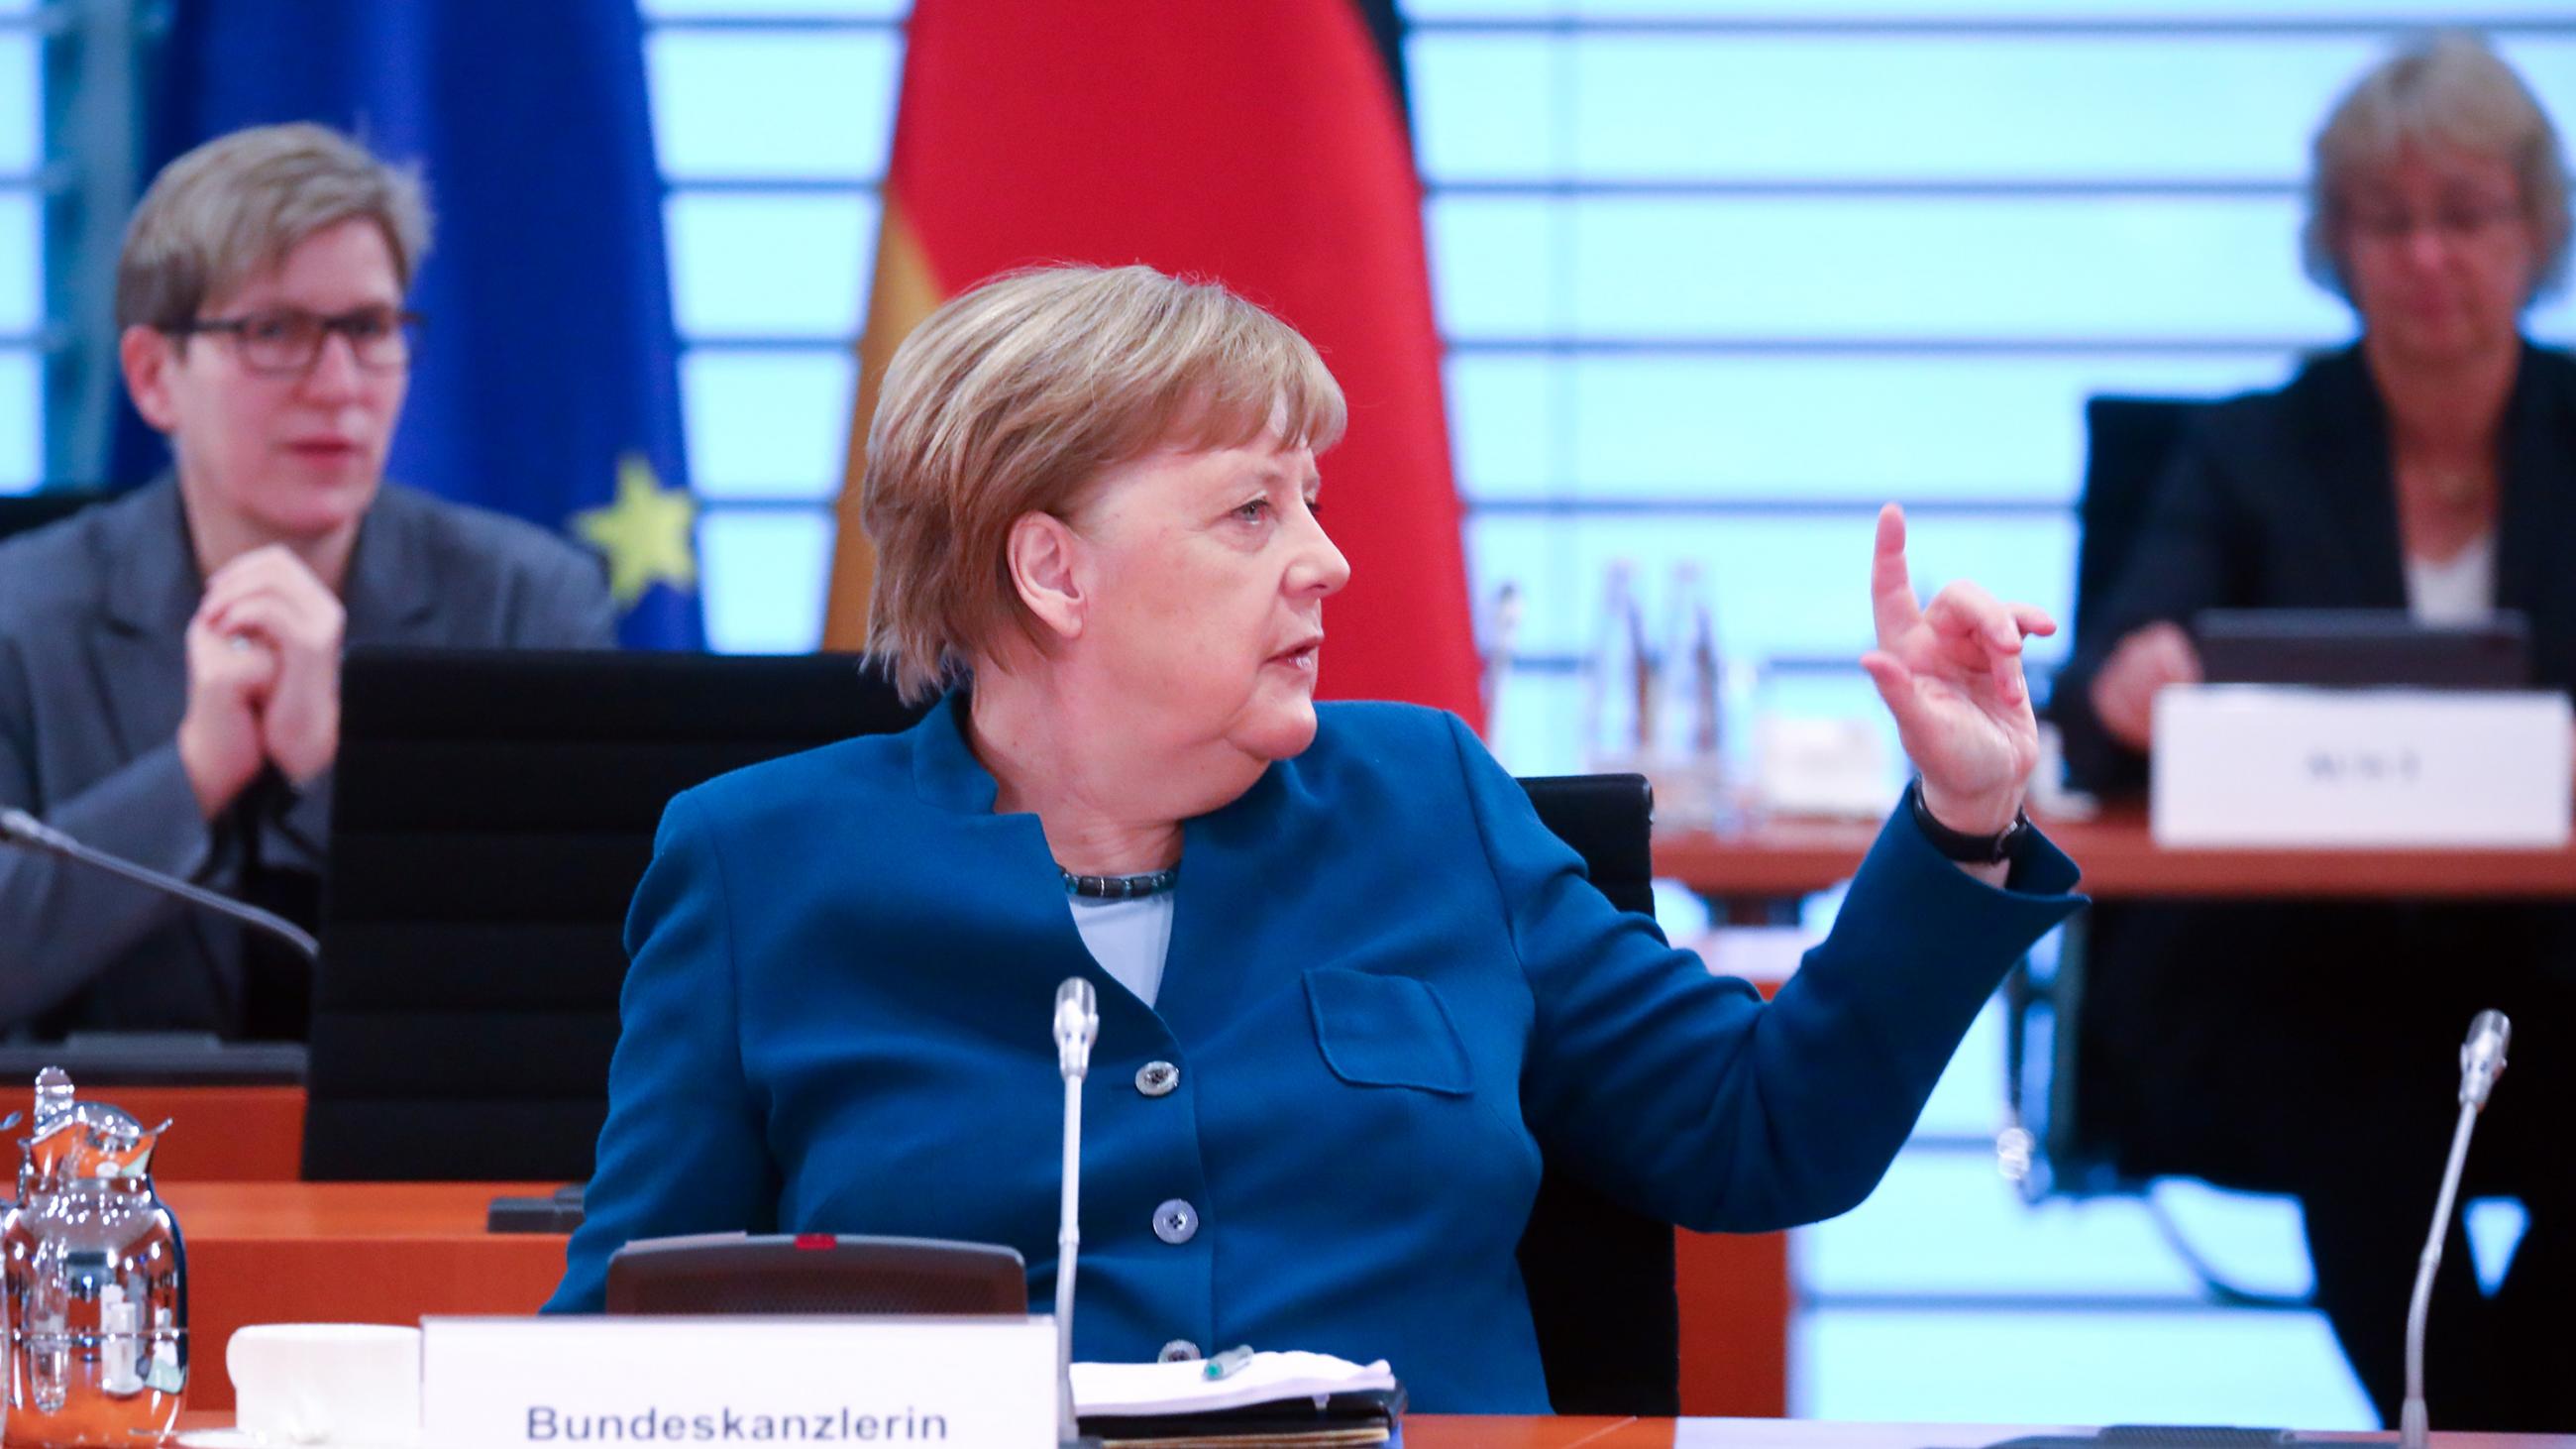 The photo shows the German chancellor at a table turning to her side gesturing to someone off camera. 